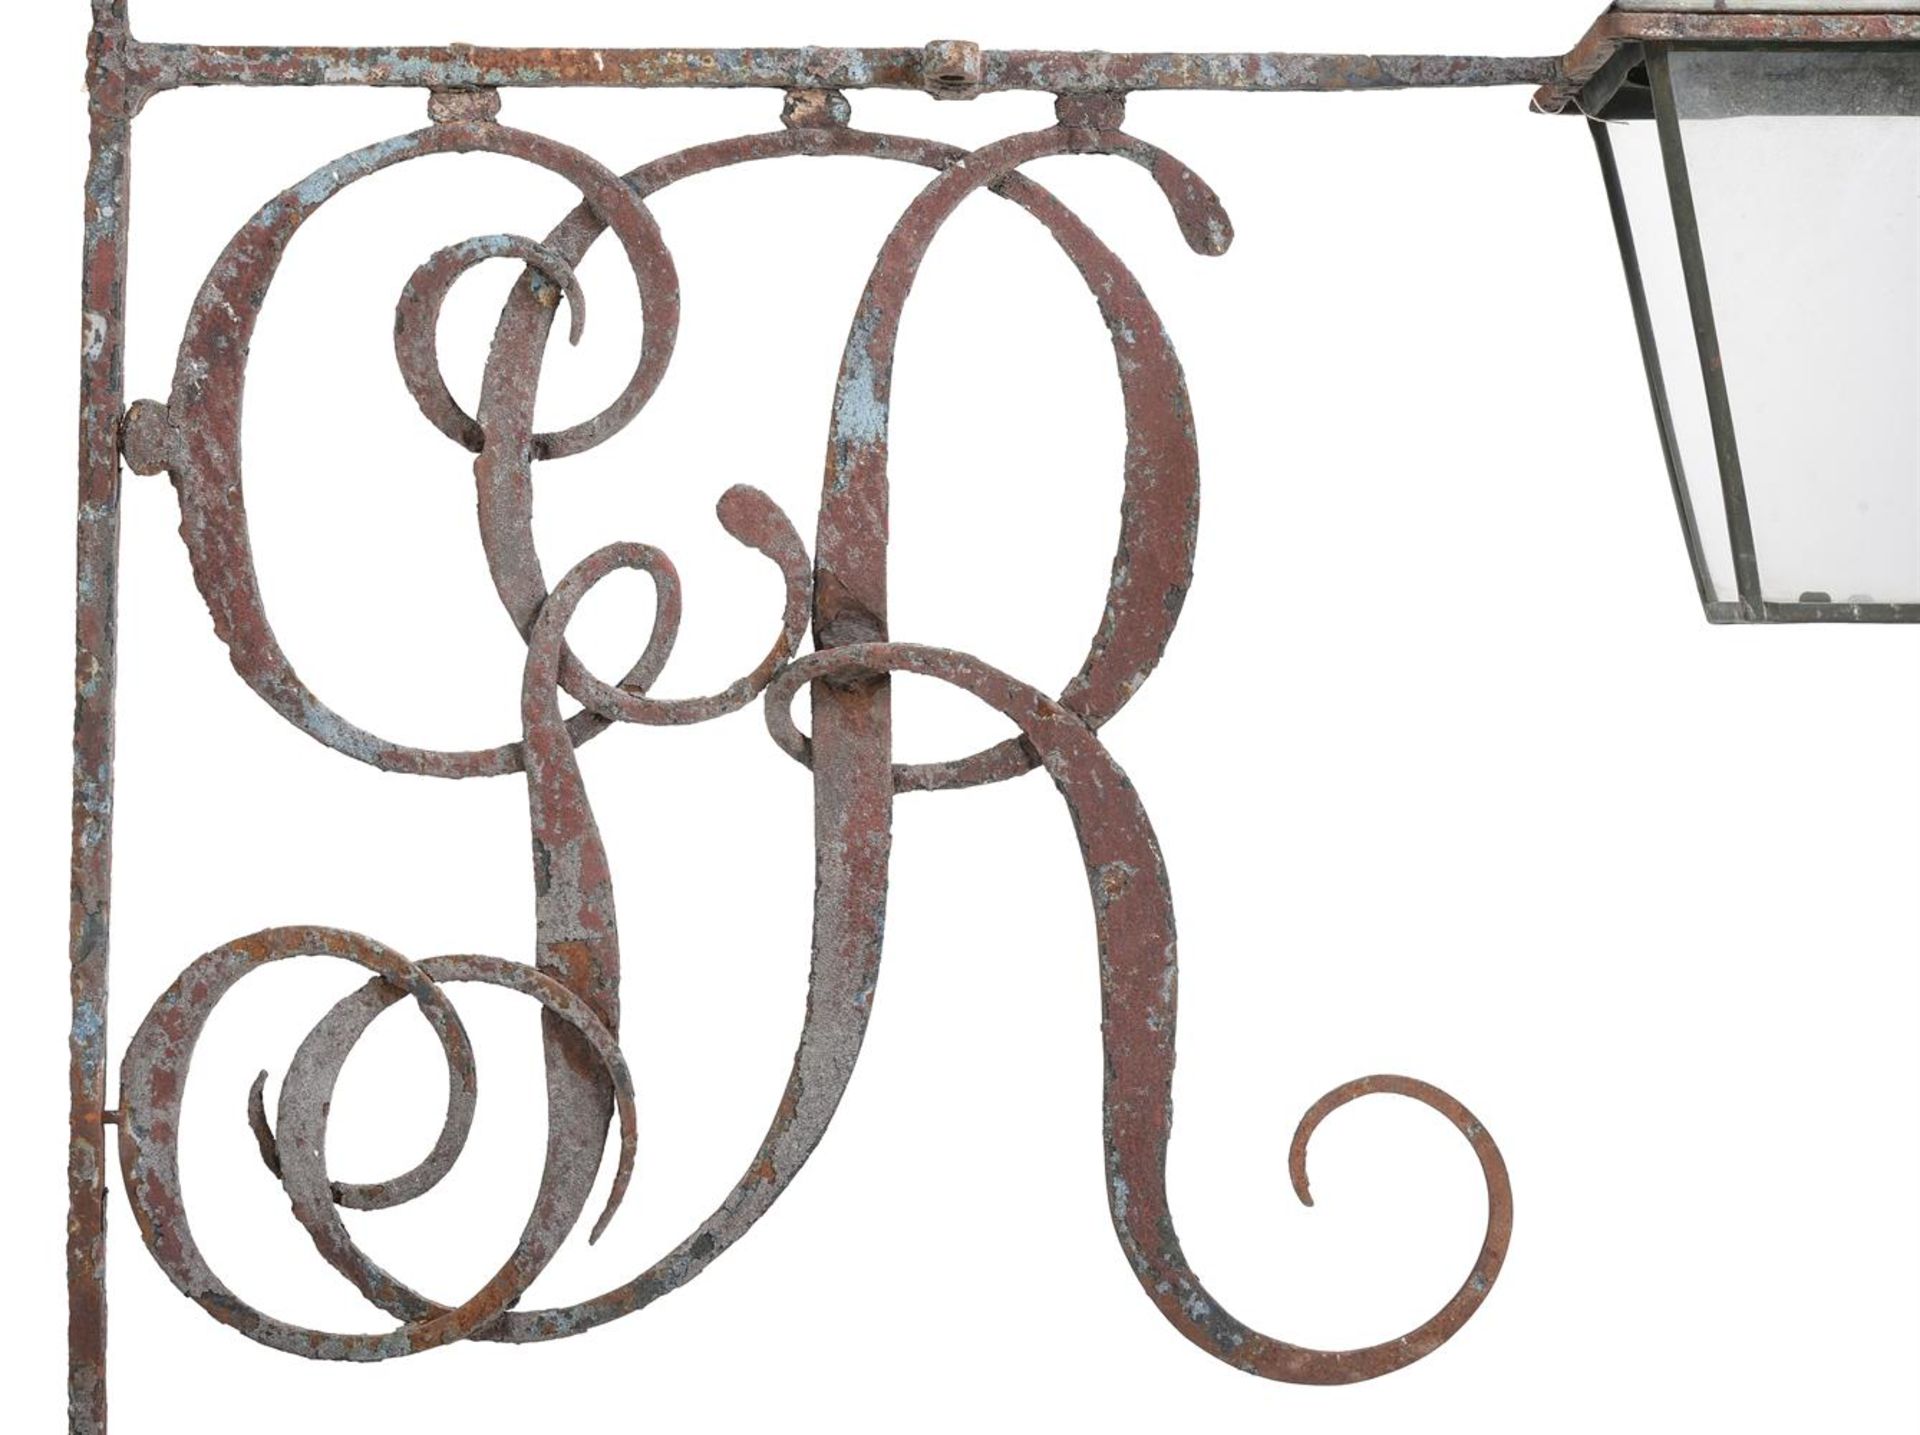 A LARGE GEORGE III WROUGHT IRON CYPHER LANTERN BRACKET, LATE 18TH OR EARLY 19TH CENTURY - Bild 2 aus 3